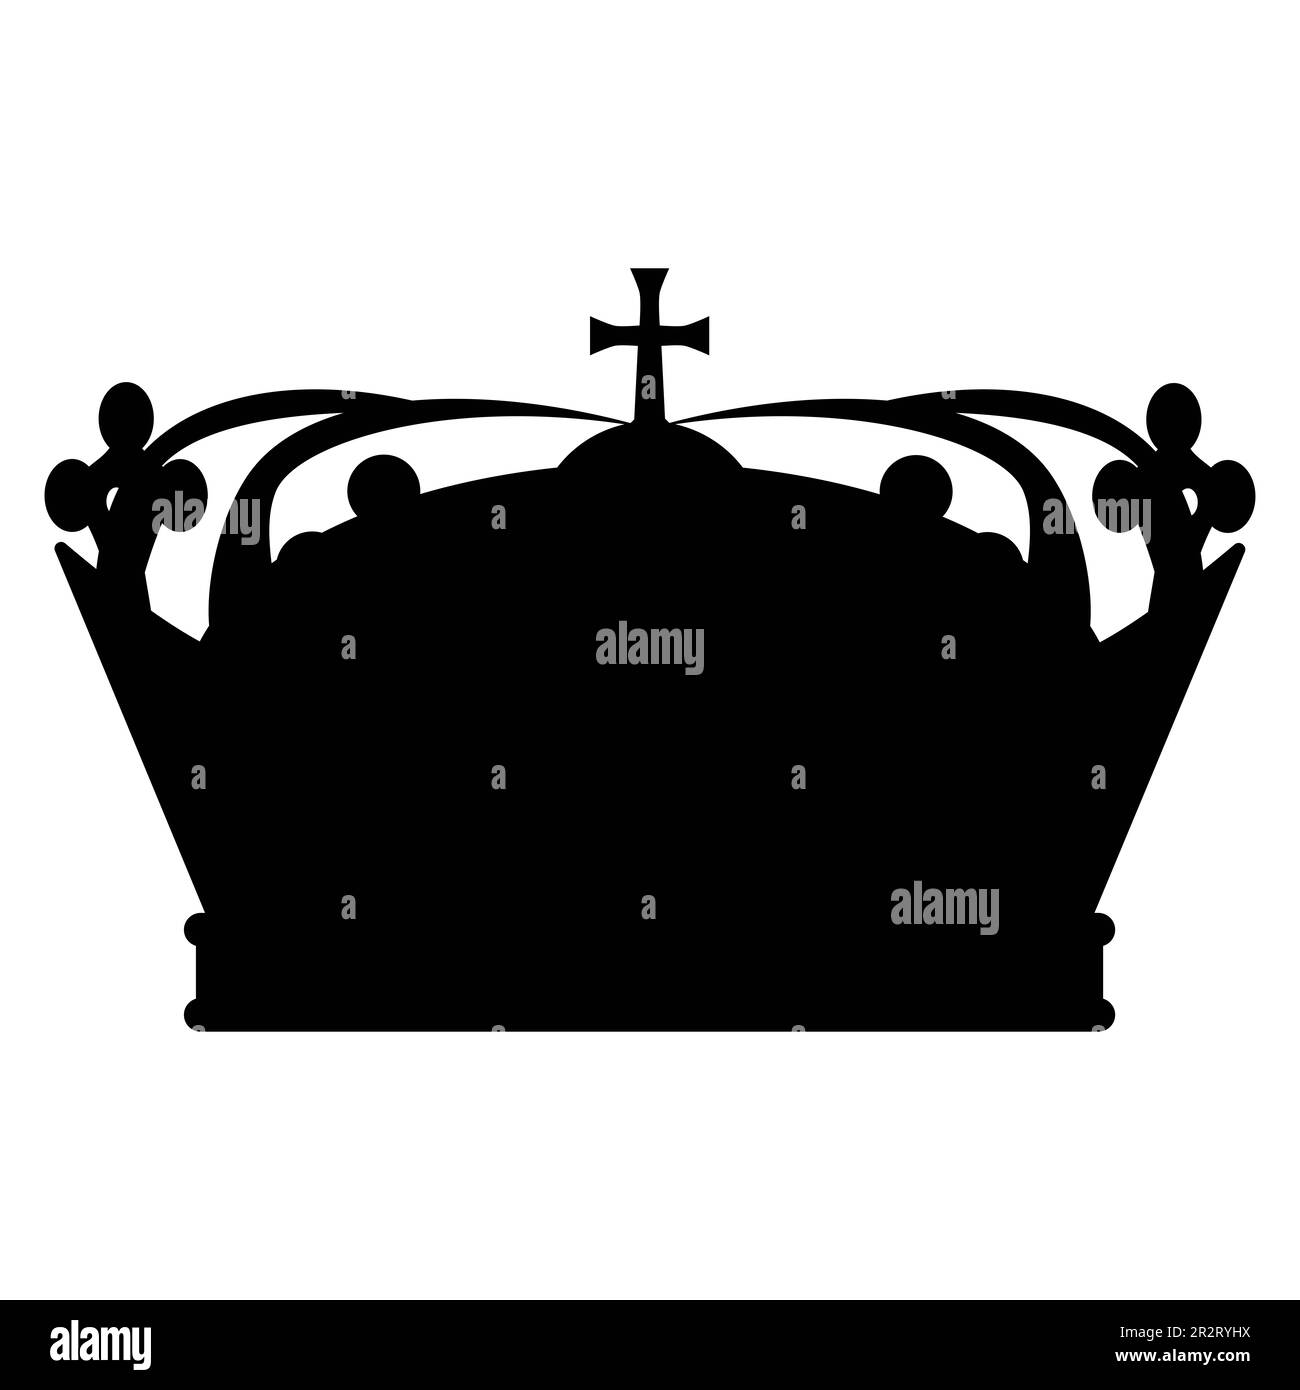 Crown silhouette. Classic royal symbol. Religion insignia. Christian cross. Illustration isolated on white background. Stock Photo